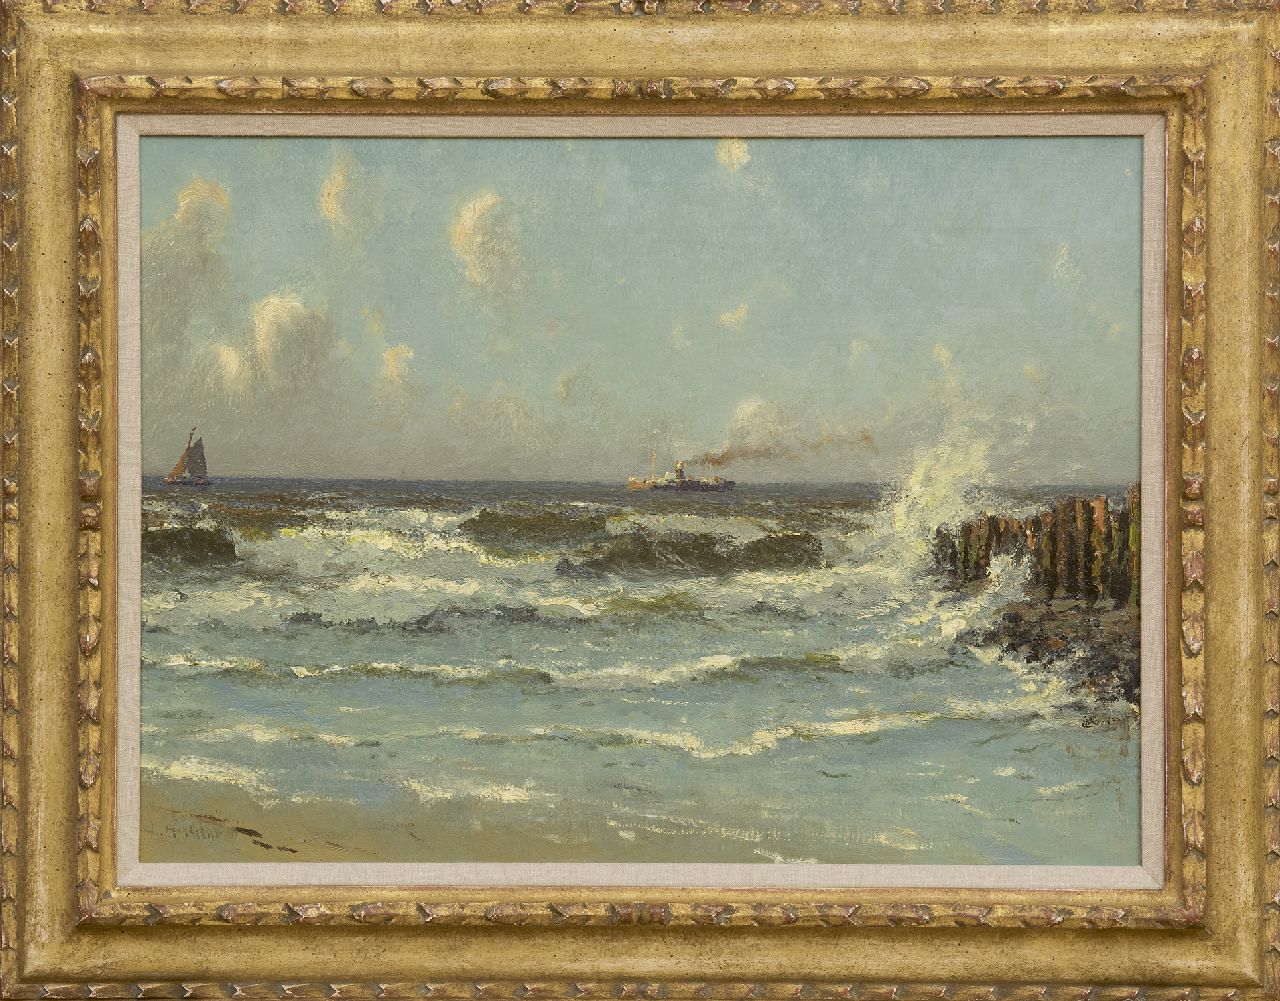 Dekker H.N.  | Henricus Nicolaas 'Henk' Dekker | Paintings offered for sale | Ships off the North Sea coast, oil on canvas 43.0 x 58.0 cm, signed l.l.